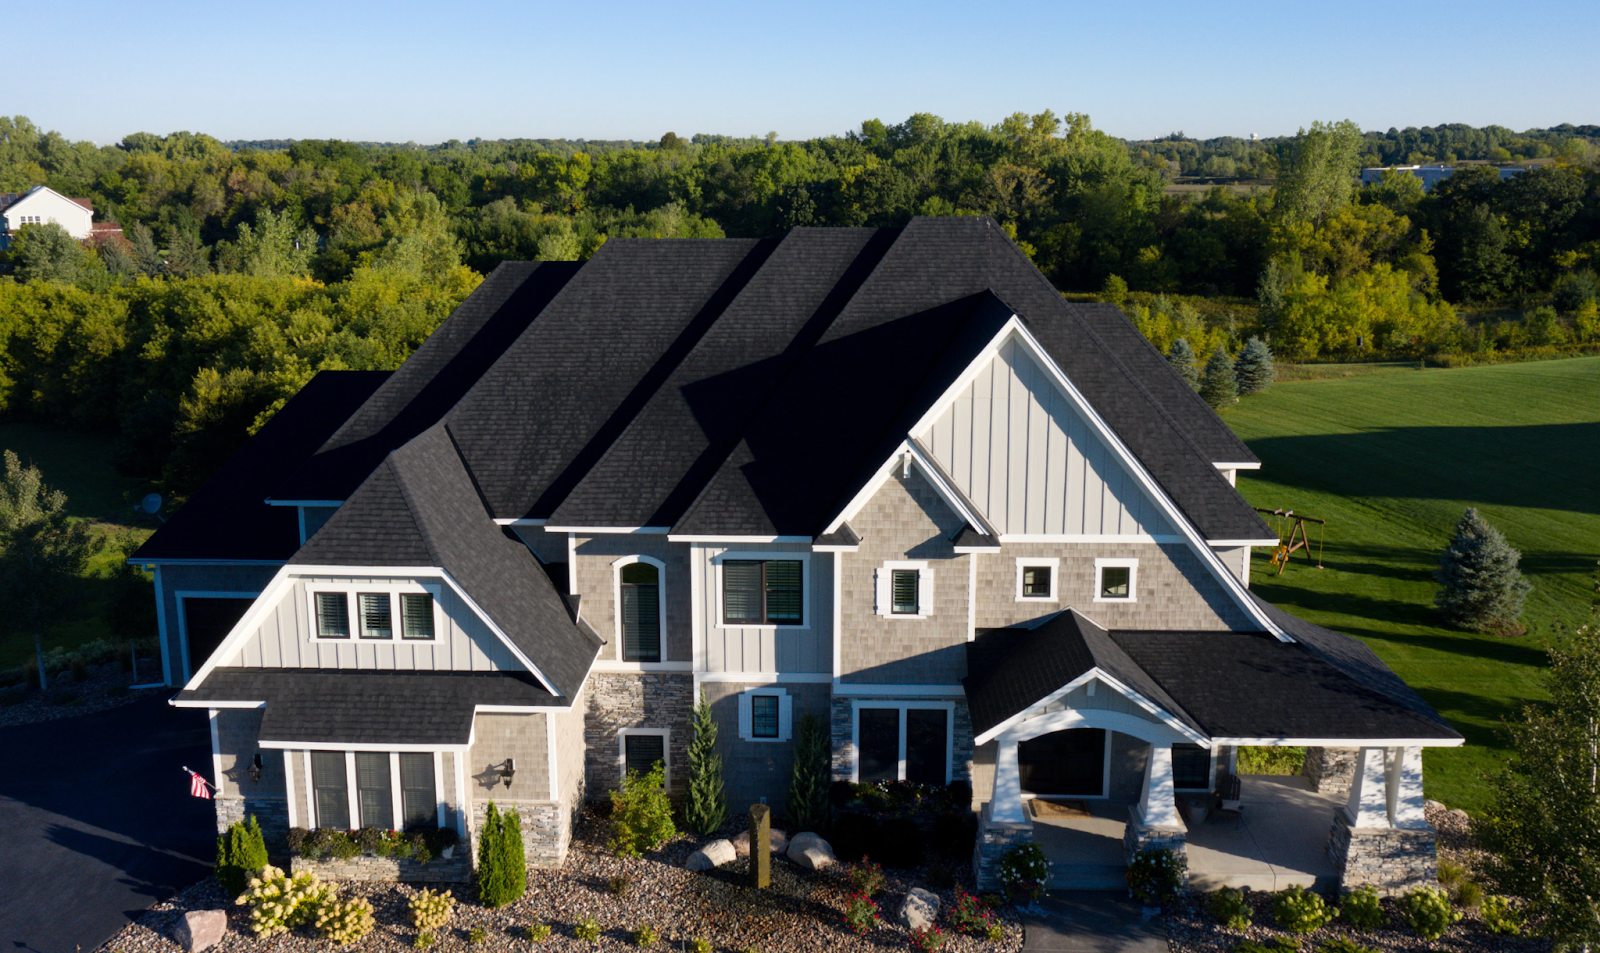 Very large home with various stone sections that has had a new black shingle roof installed